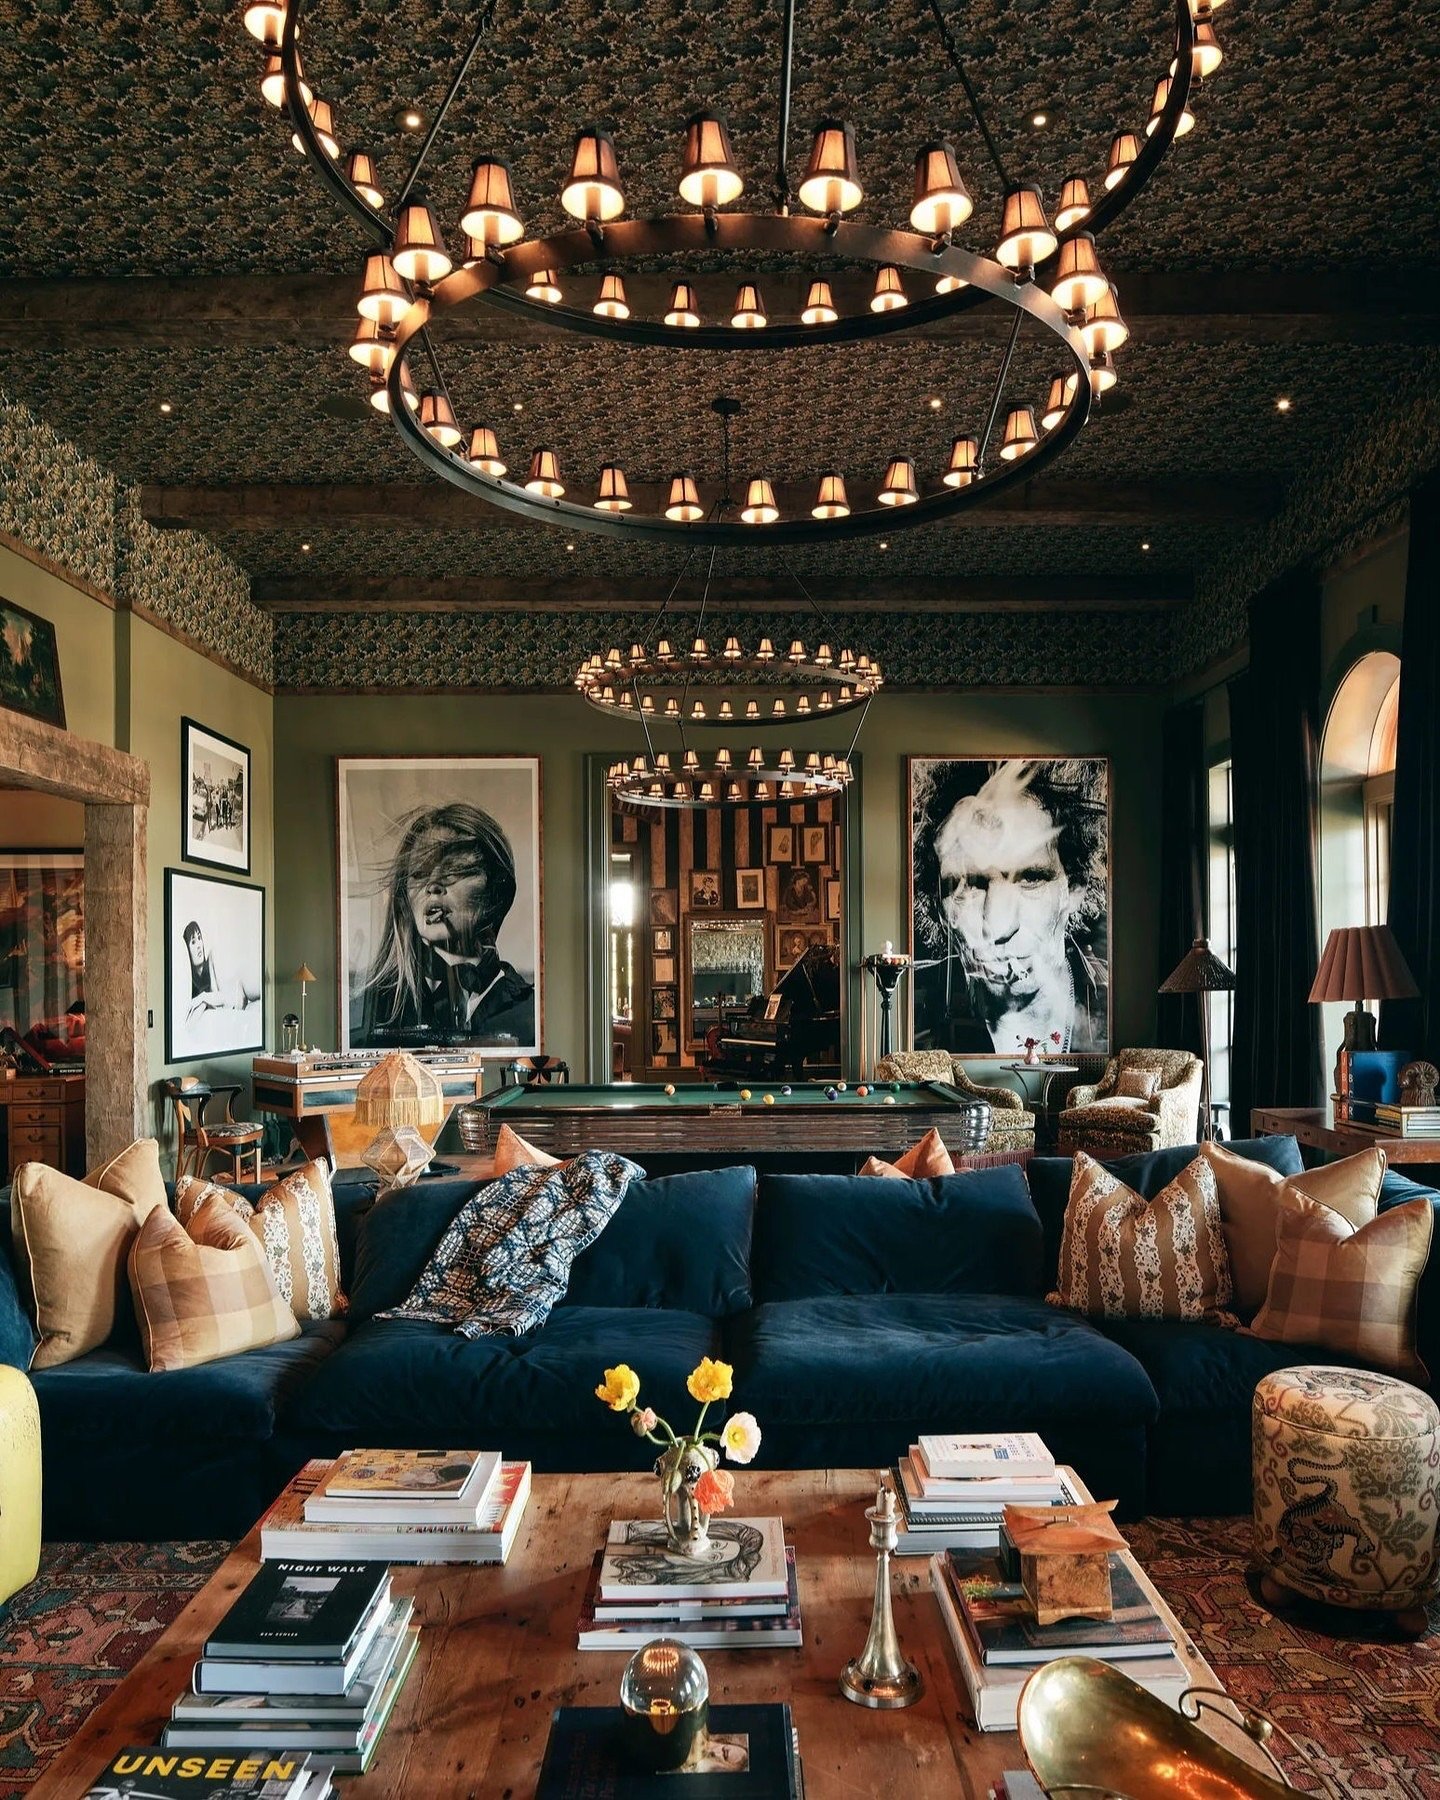 Eclectic + moody and we&rsquo;re here for it 🤎 Swooning over every detail of this playfully gothic home by @pierceandward. Photo by @tycole // Styling by @colson__horton